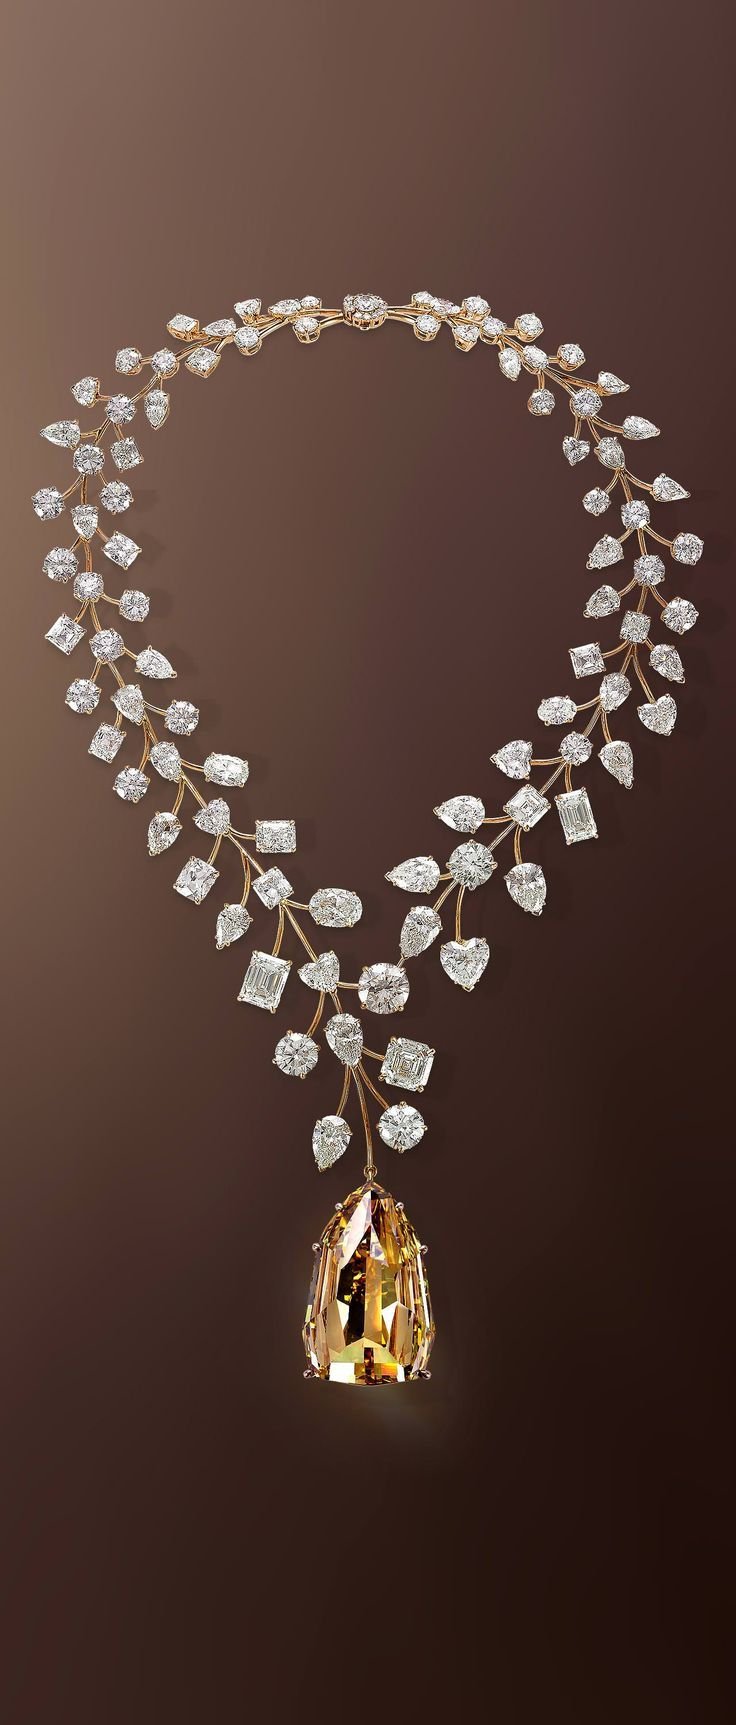 The Mouawad L’Incomparable Diamond Necklace Features the Flawless 407_48-Carat Yellow Diamond, Suspended from a White Diamond Necklace Intertwined by 18-Karat Rose Gold Branchlets.jpeg